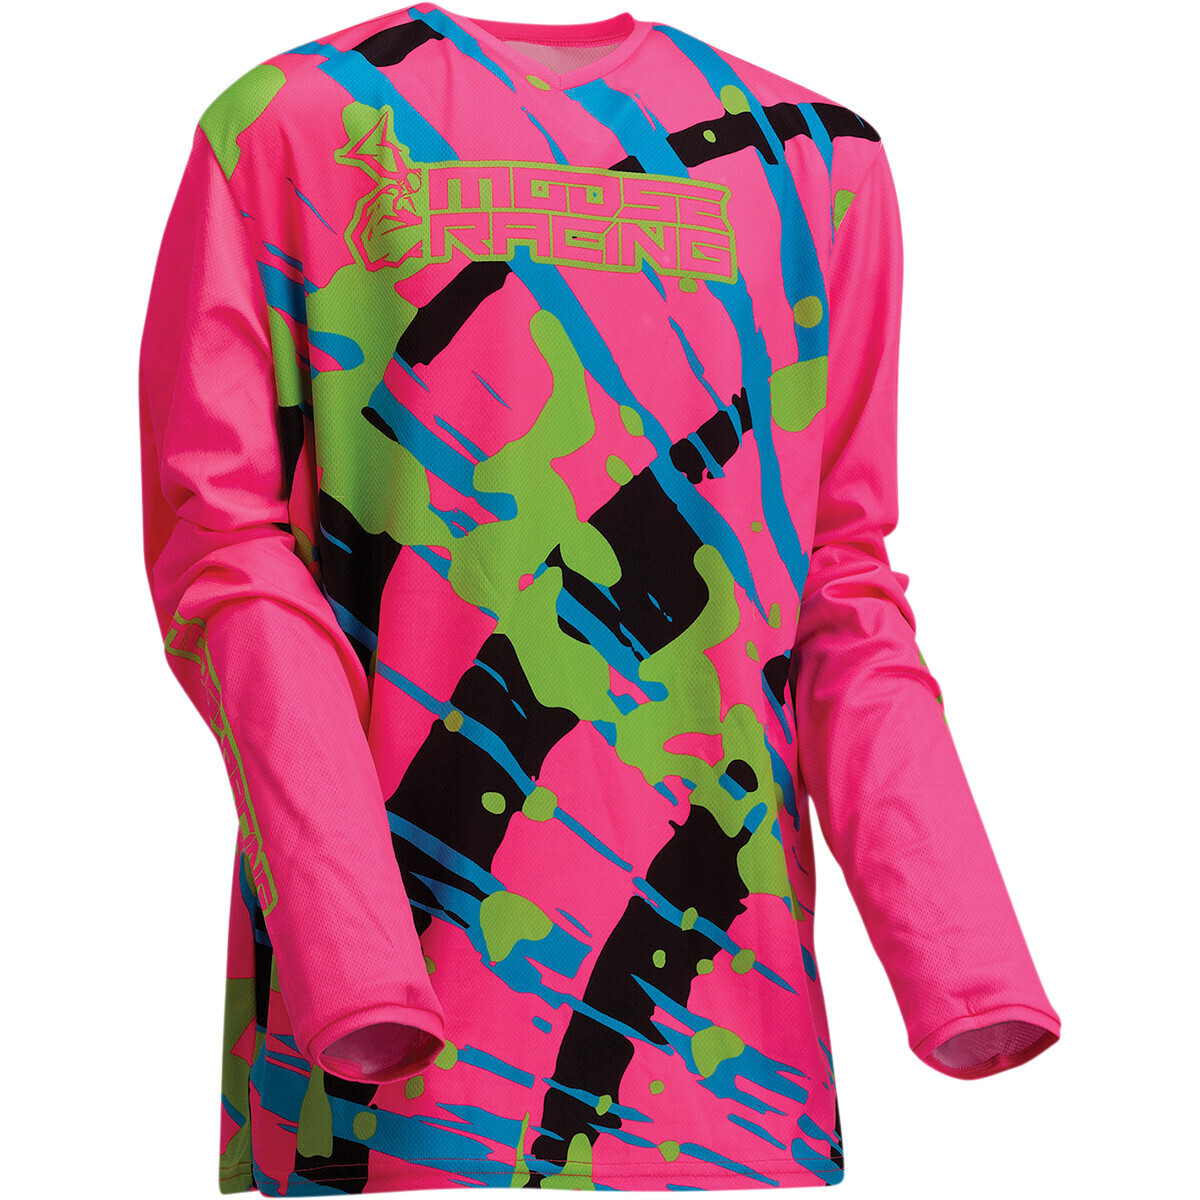 MOOSE JERSEY YOUTH AGROID PINK